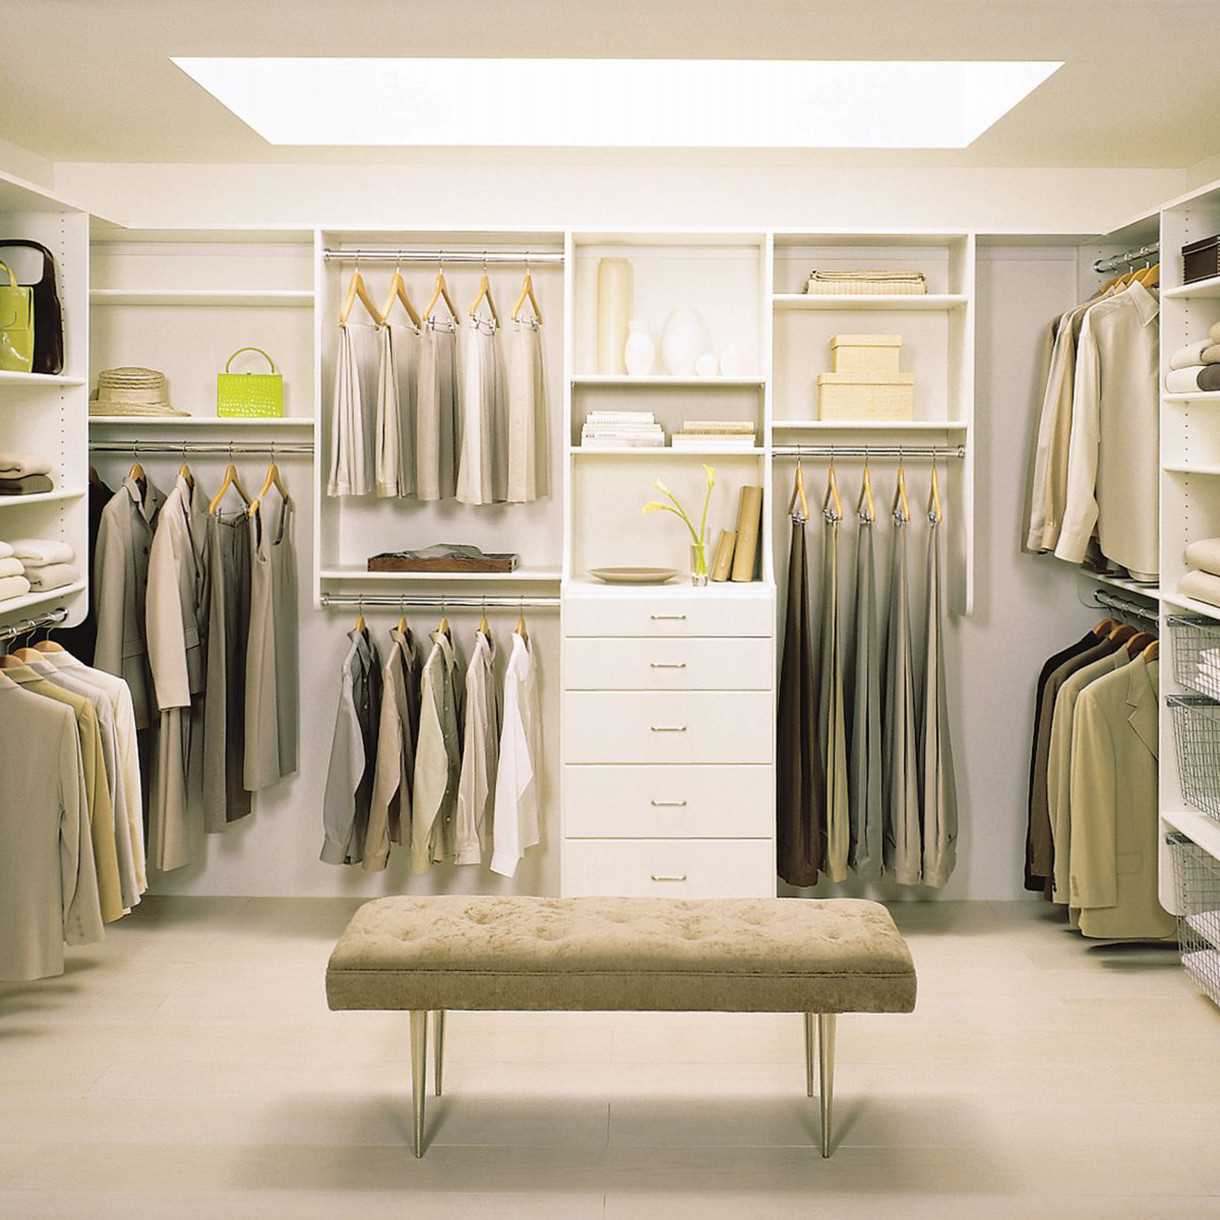 version of the bright style of the dressing room